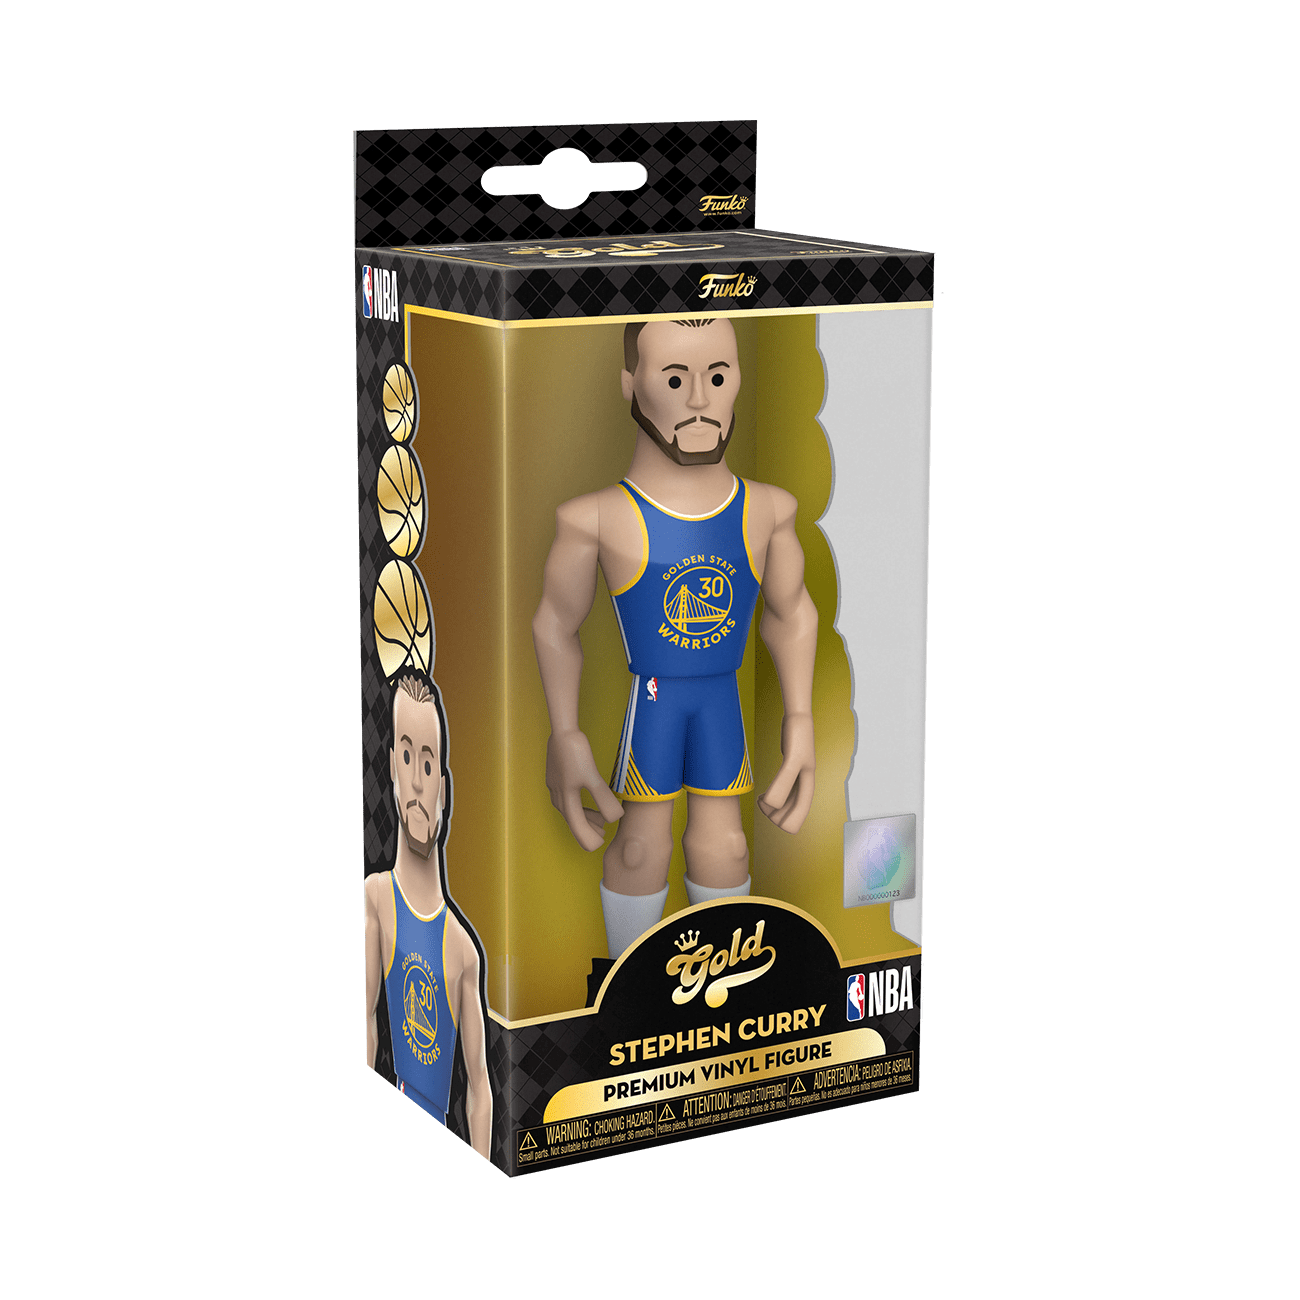 Does anybody know why this Steph curry Funko is wearing number 46 instead  of number 30 : r/funkopop